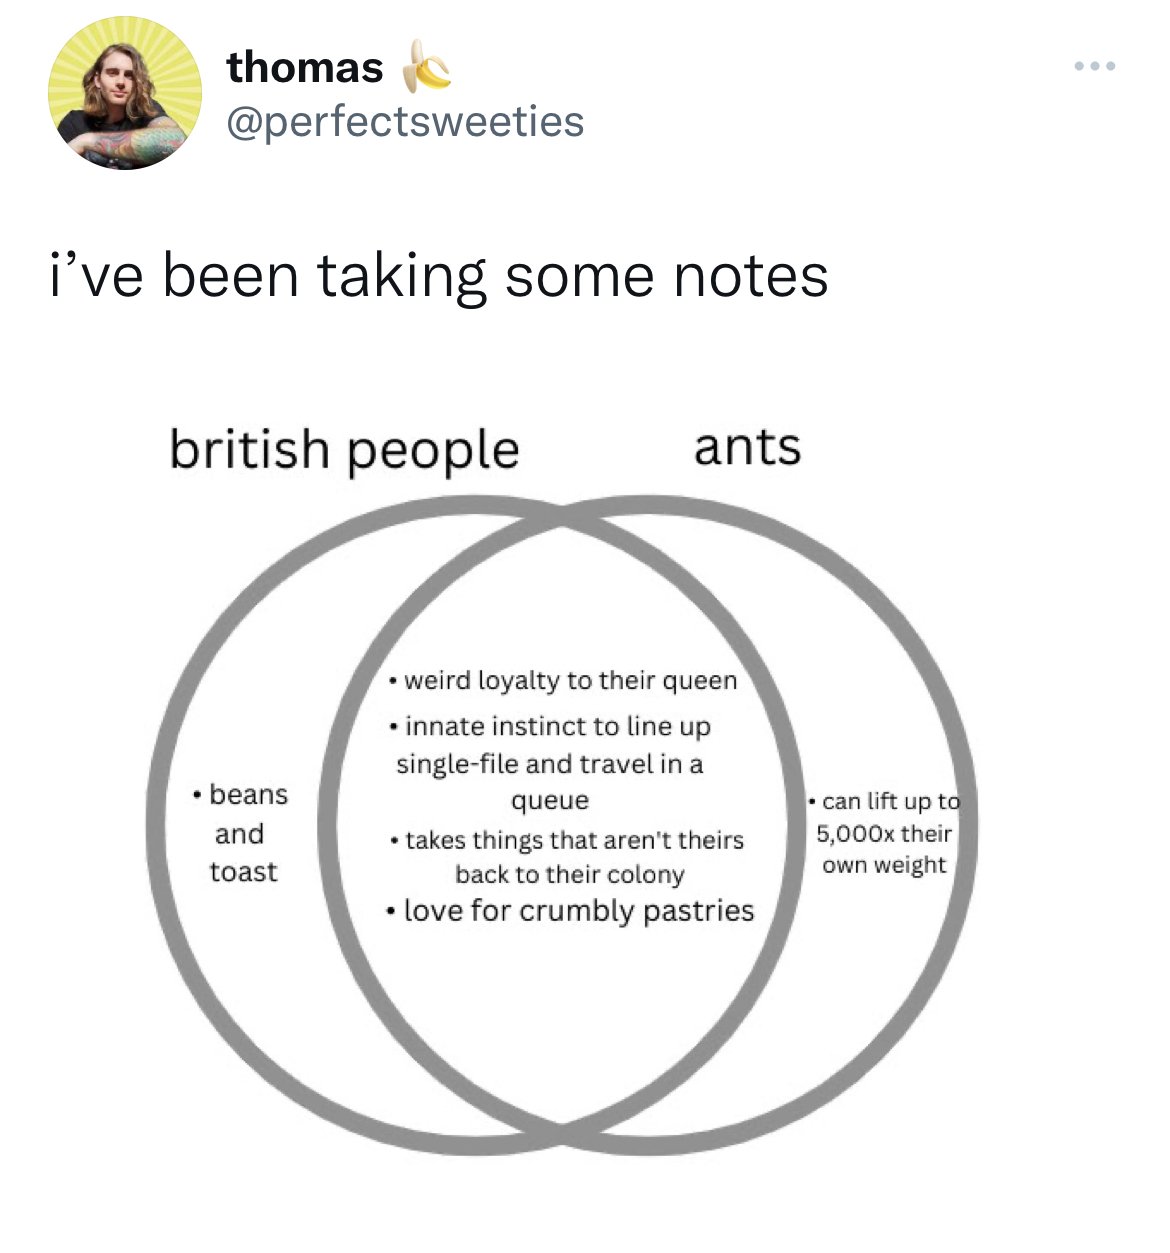 diagram - G thomas i've been taking some notes british people .beans and toast ants weird loyalty to their queen innate instinct to line up singlefile and travel in a queue takes things that aren't theirs back to their colony love for crumbly pastries can